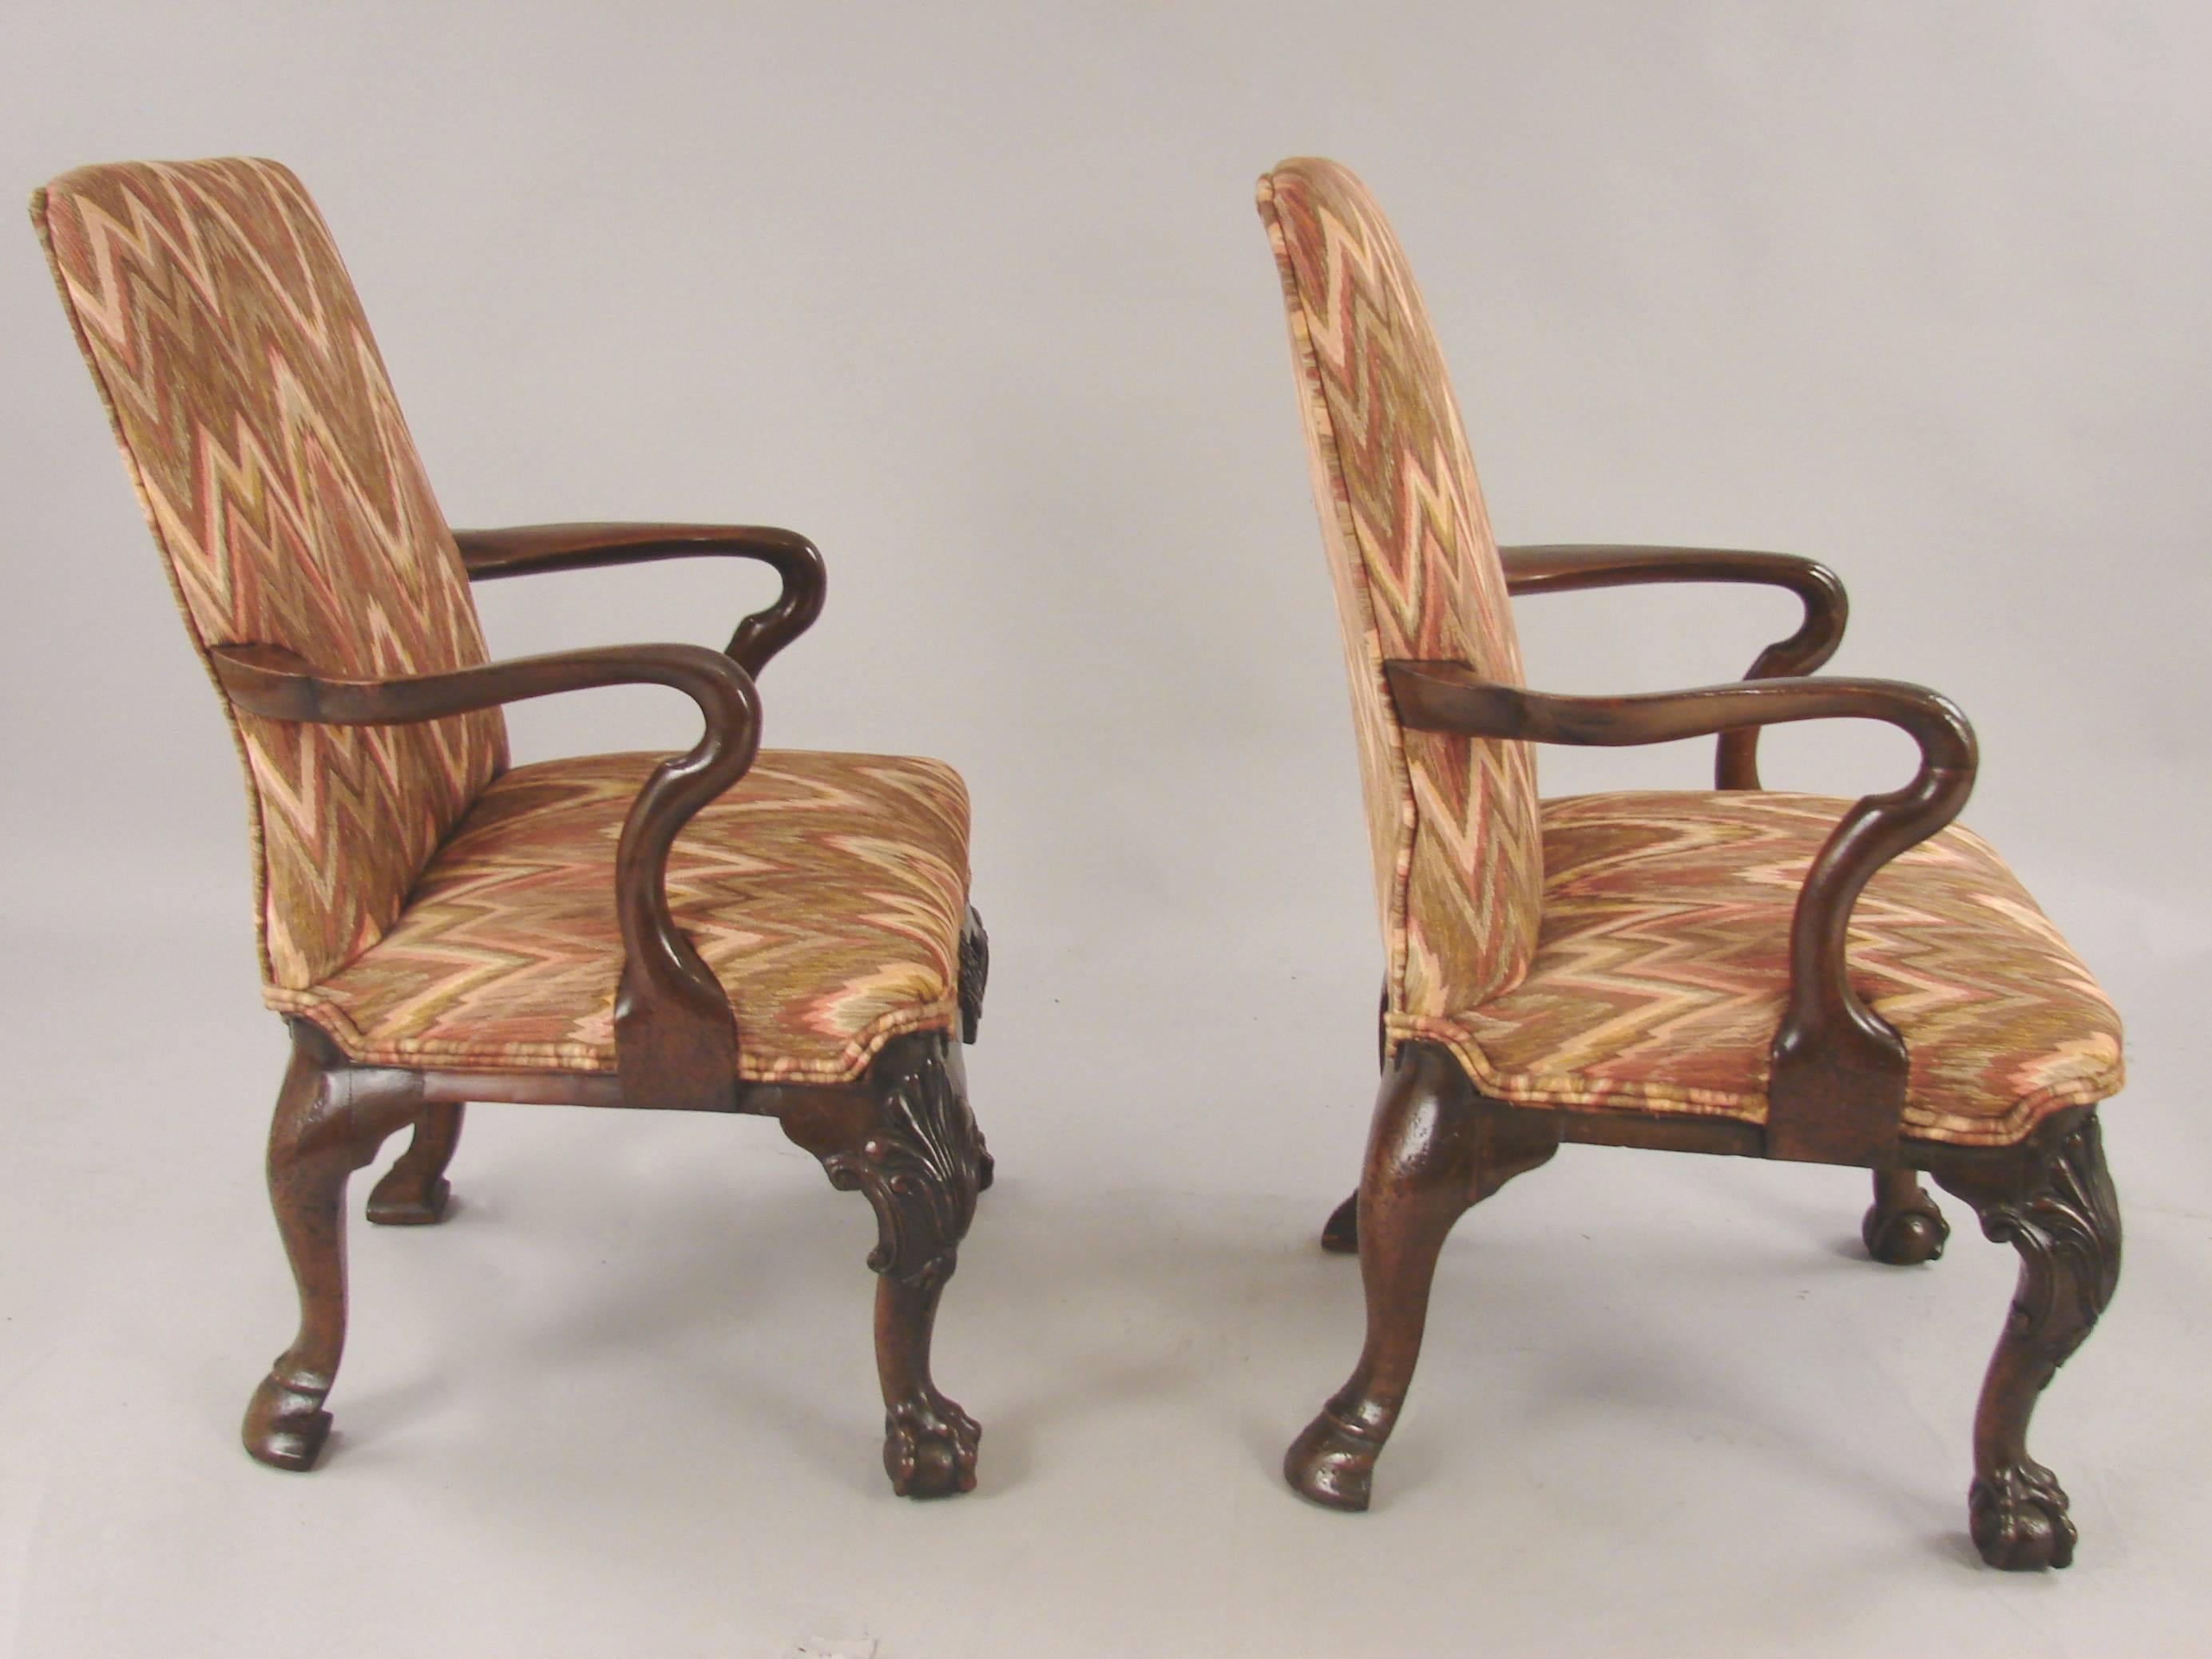 A fine pair of English George II style mahogany child's chairs now covered in flame stitch upholstery. These child's chairs are beautifully carved with lovely shell apron, carved knees and ball and claw feet, circa 1840-1860.